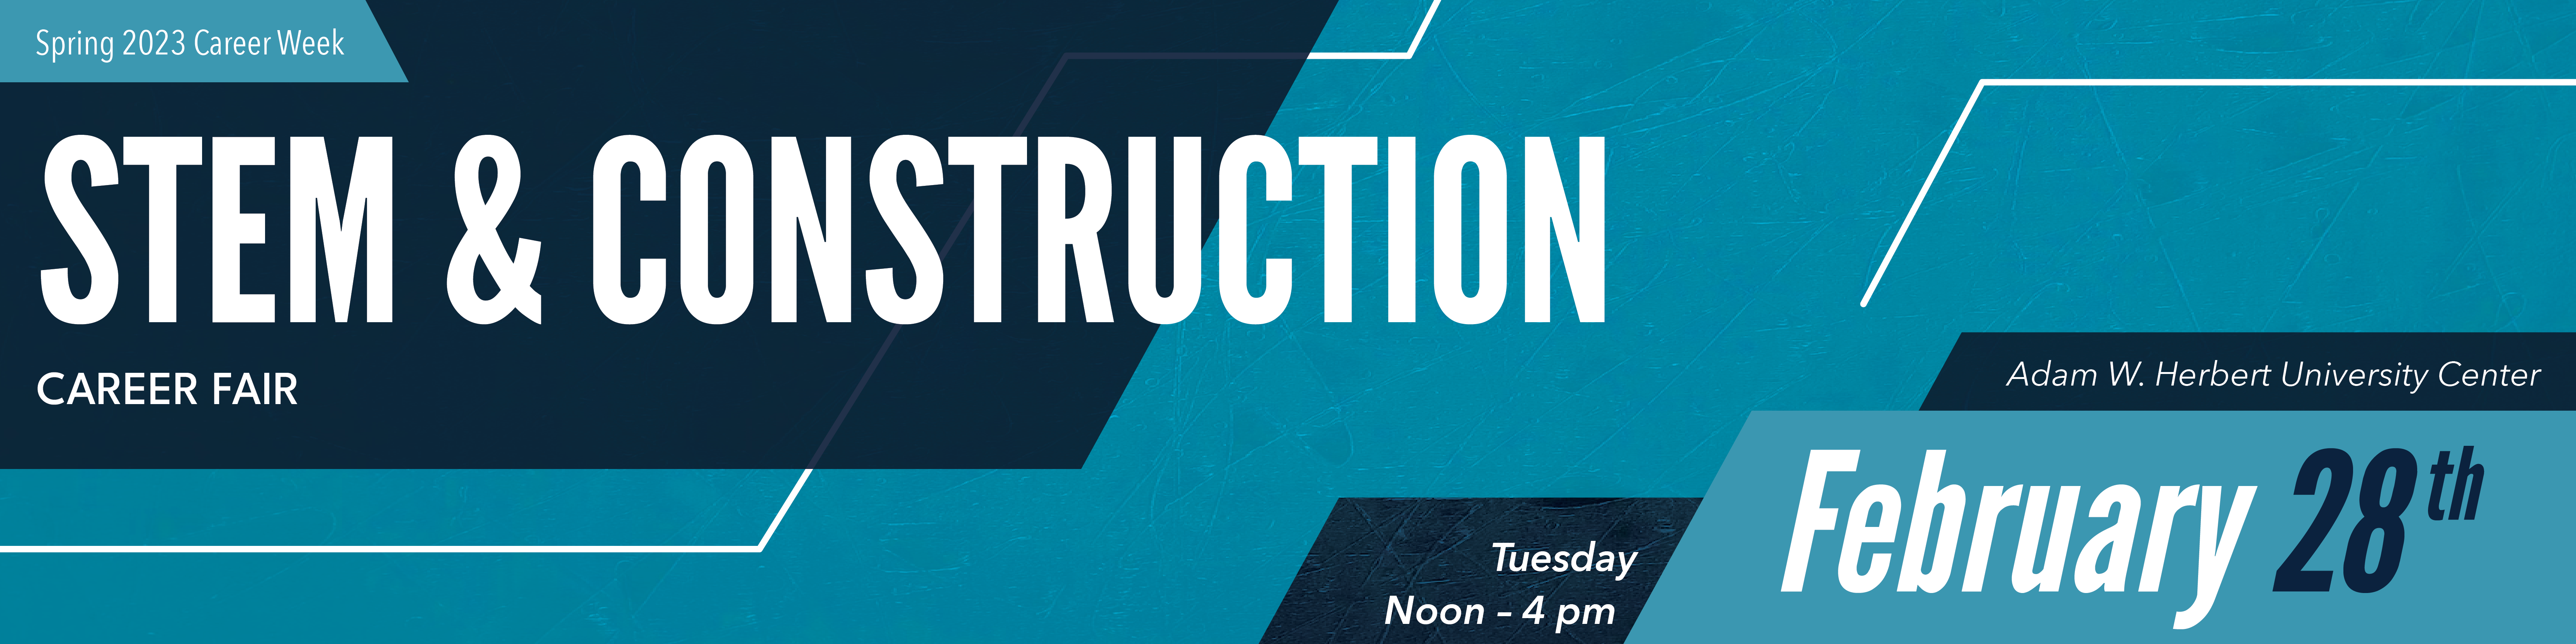 Spring 2023 Career Week - STEM and Construction Career Fair. Tuesday, February 28, 2023 from noon to 4 p.m. at the Adam W. Herbert University Center